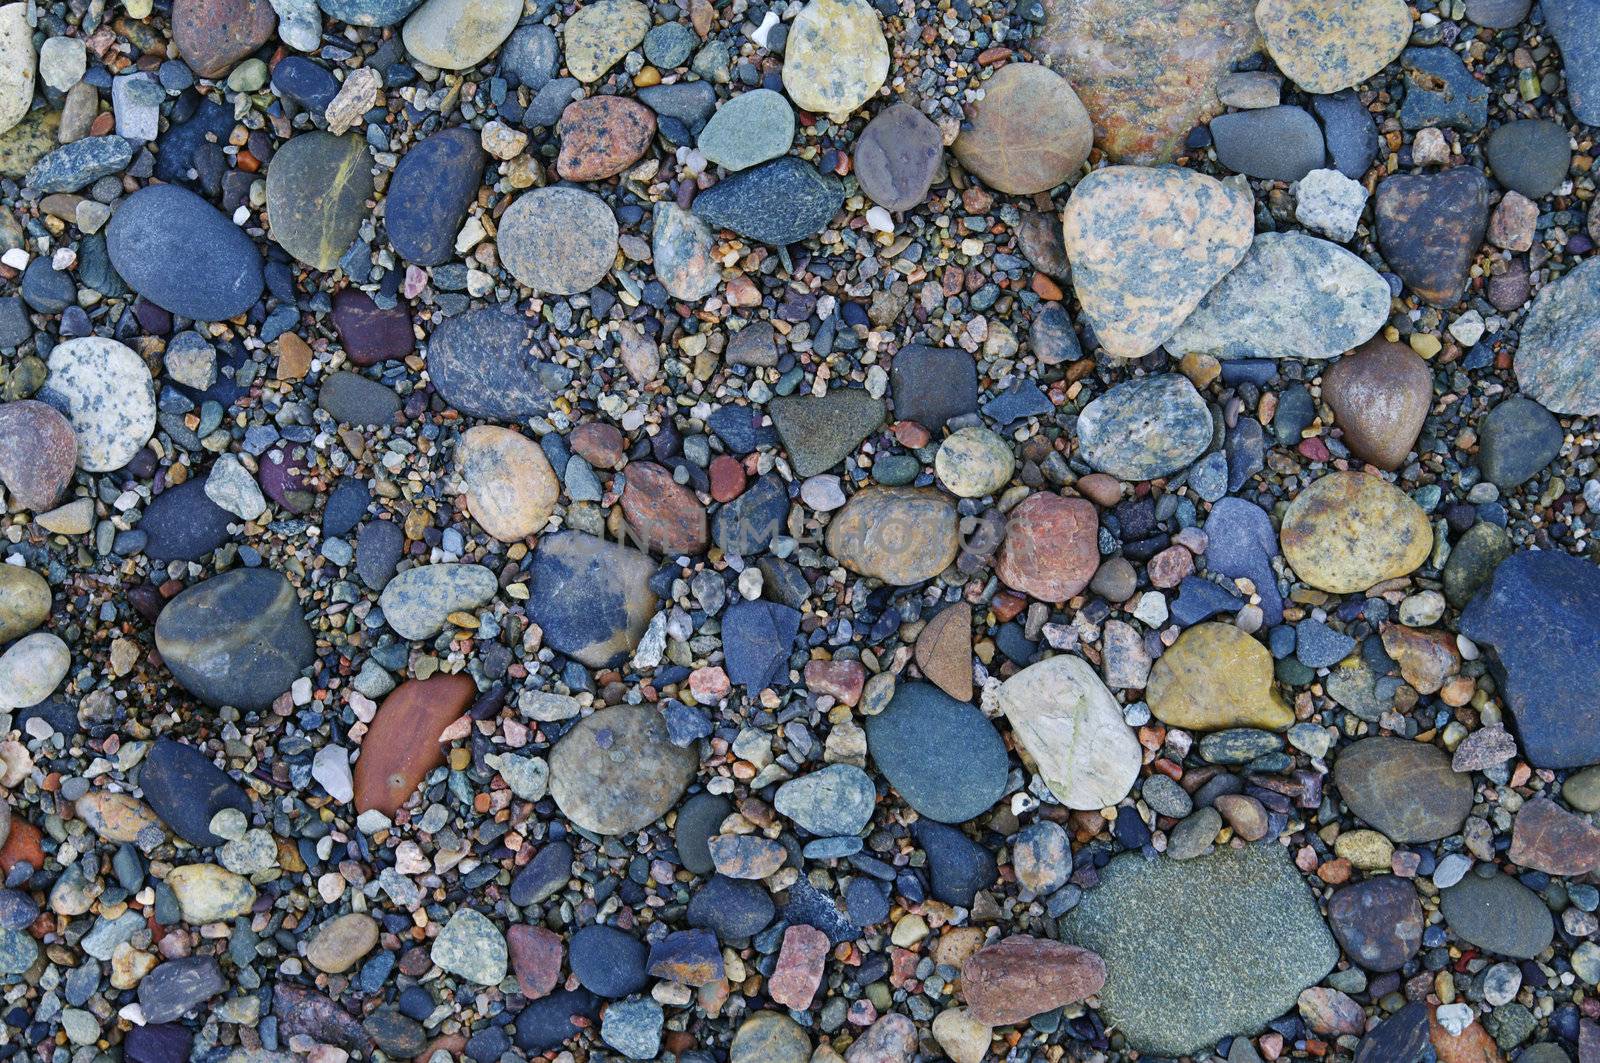 Fine beach stones along the Bay of Fundy shore 